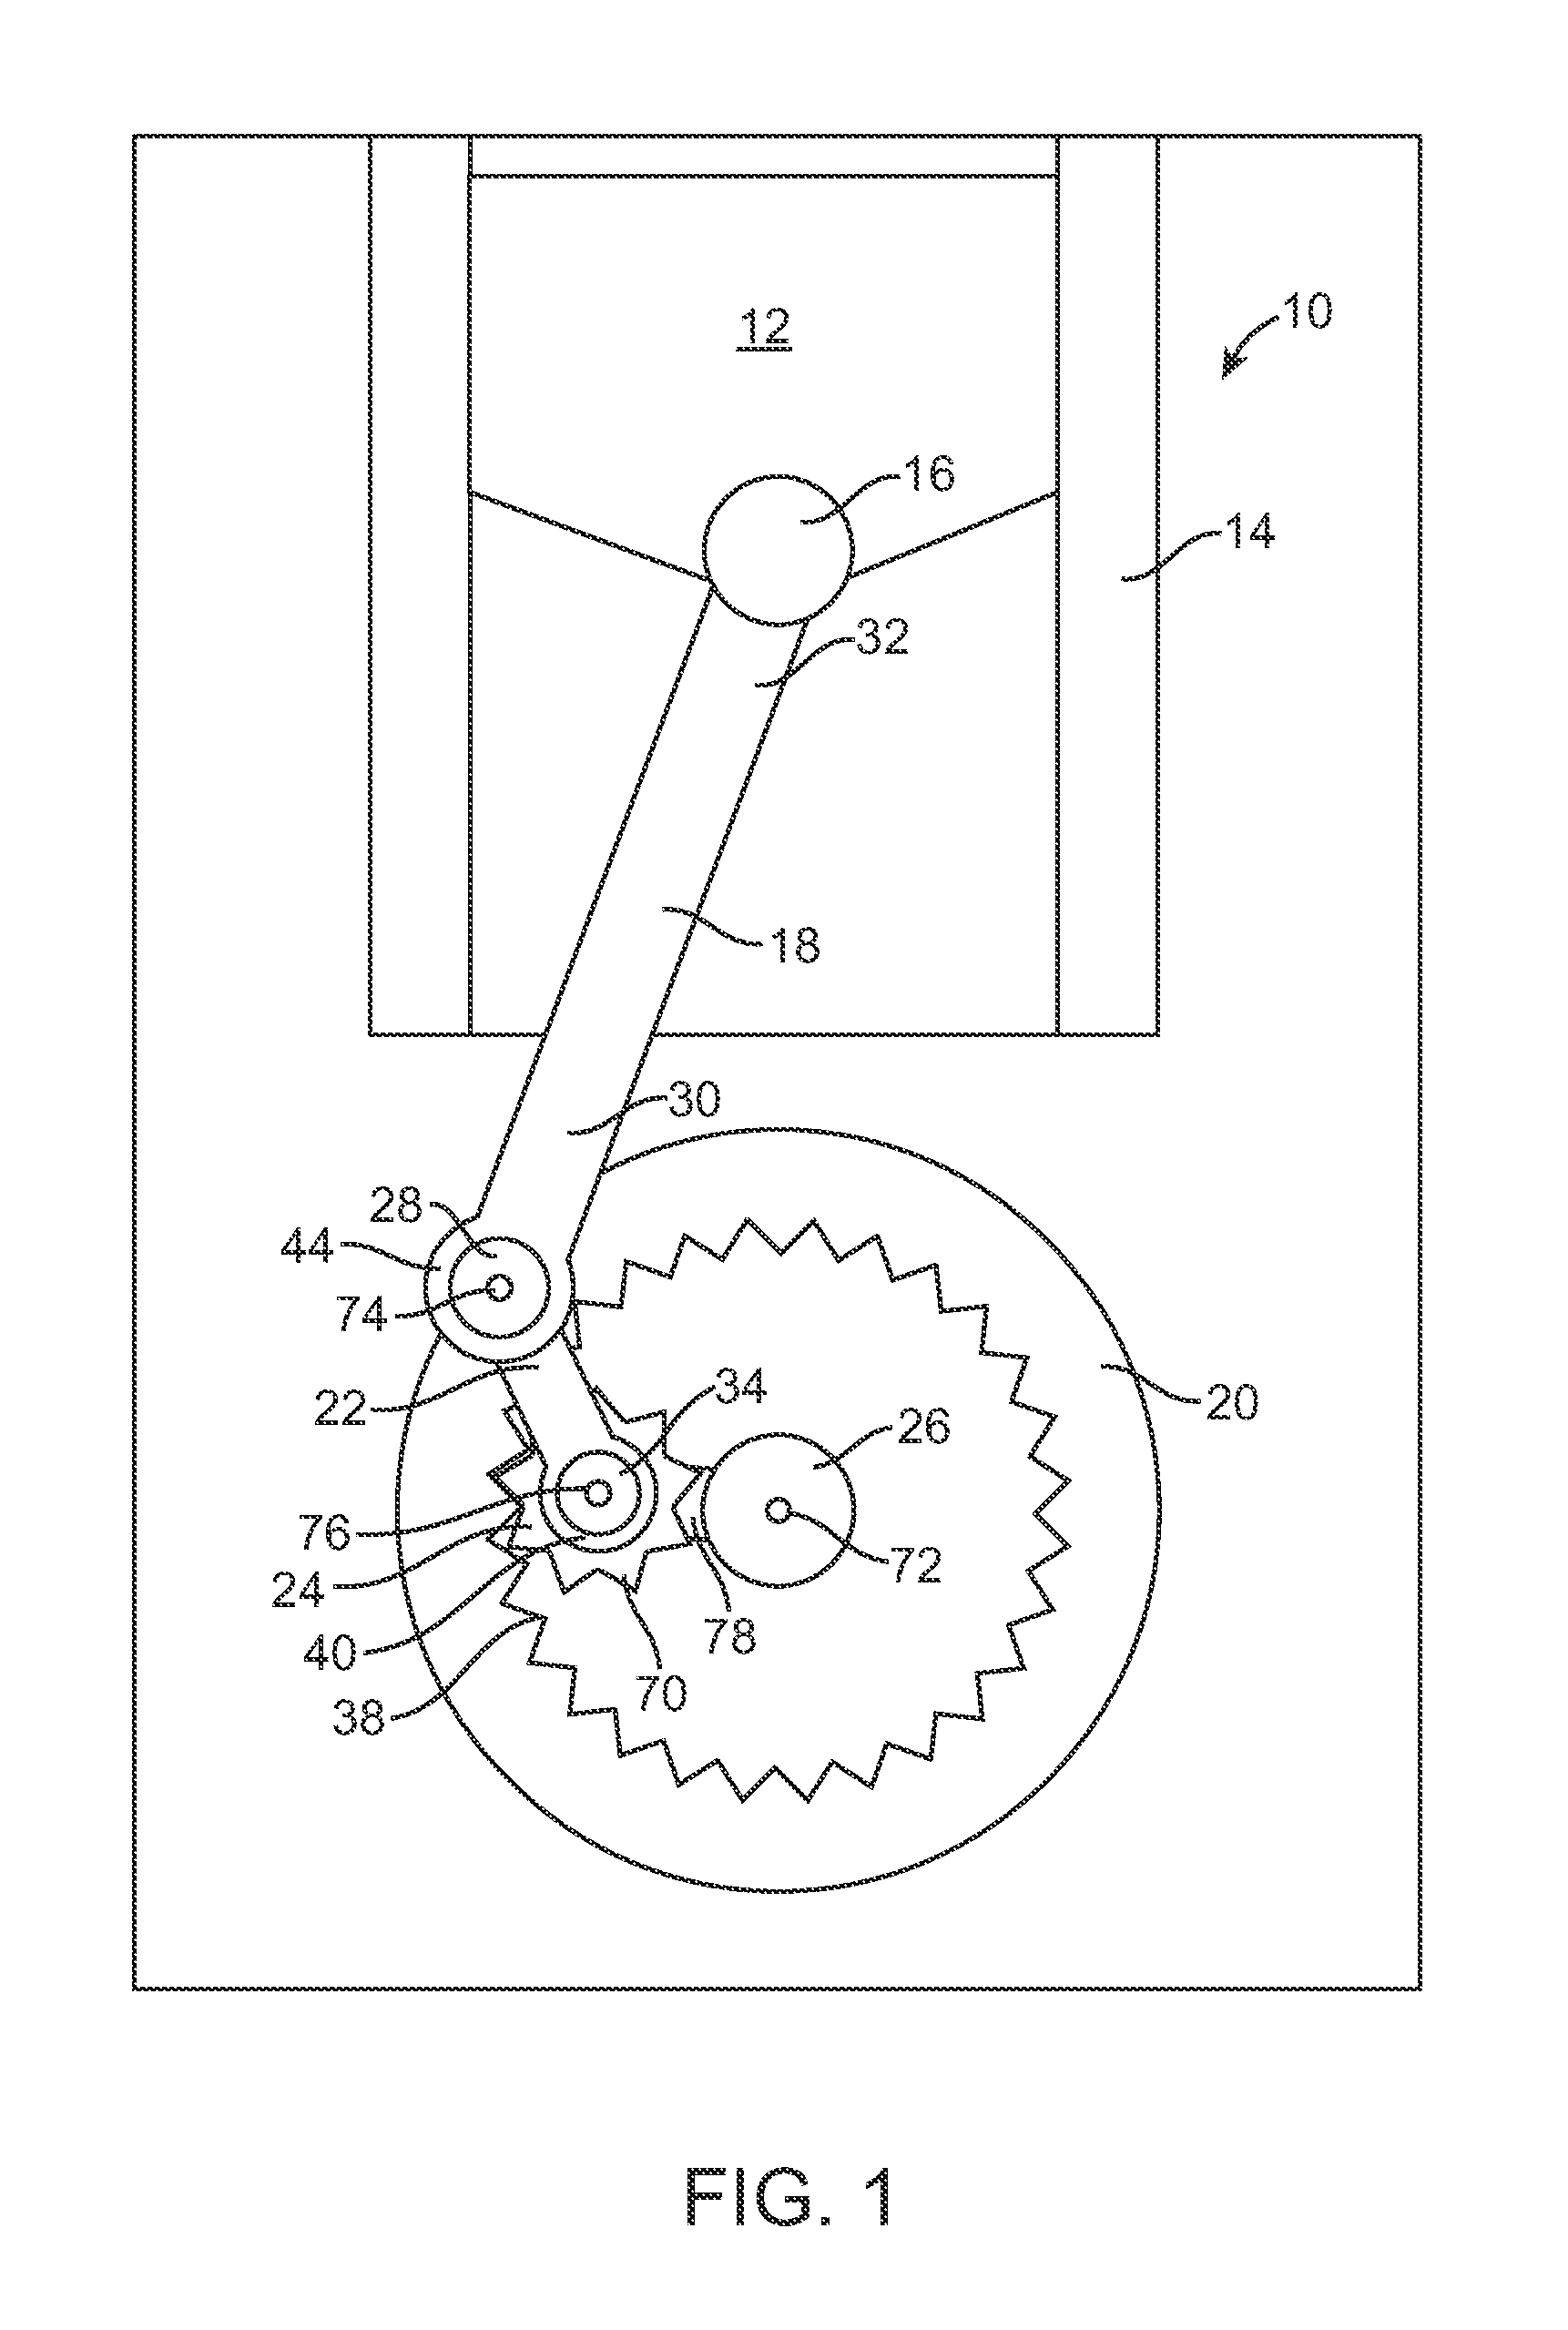 Radial internal combustion engine with different stroke volumes